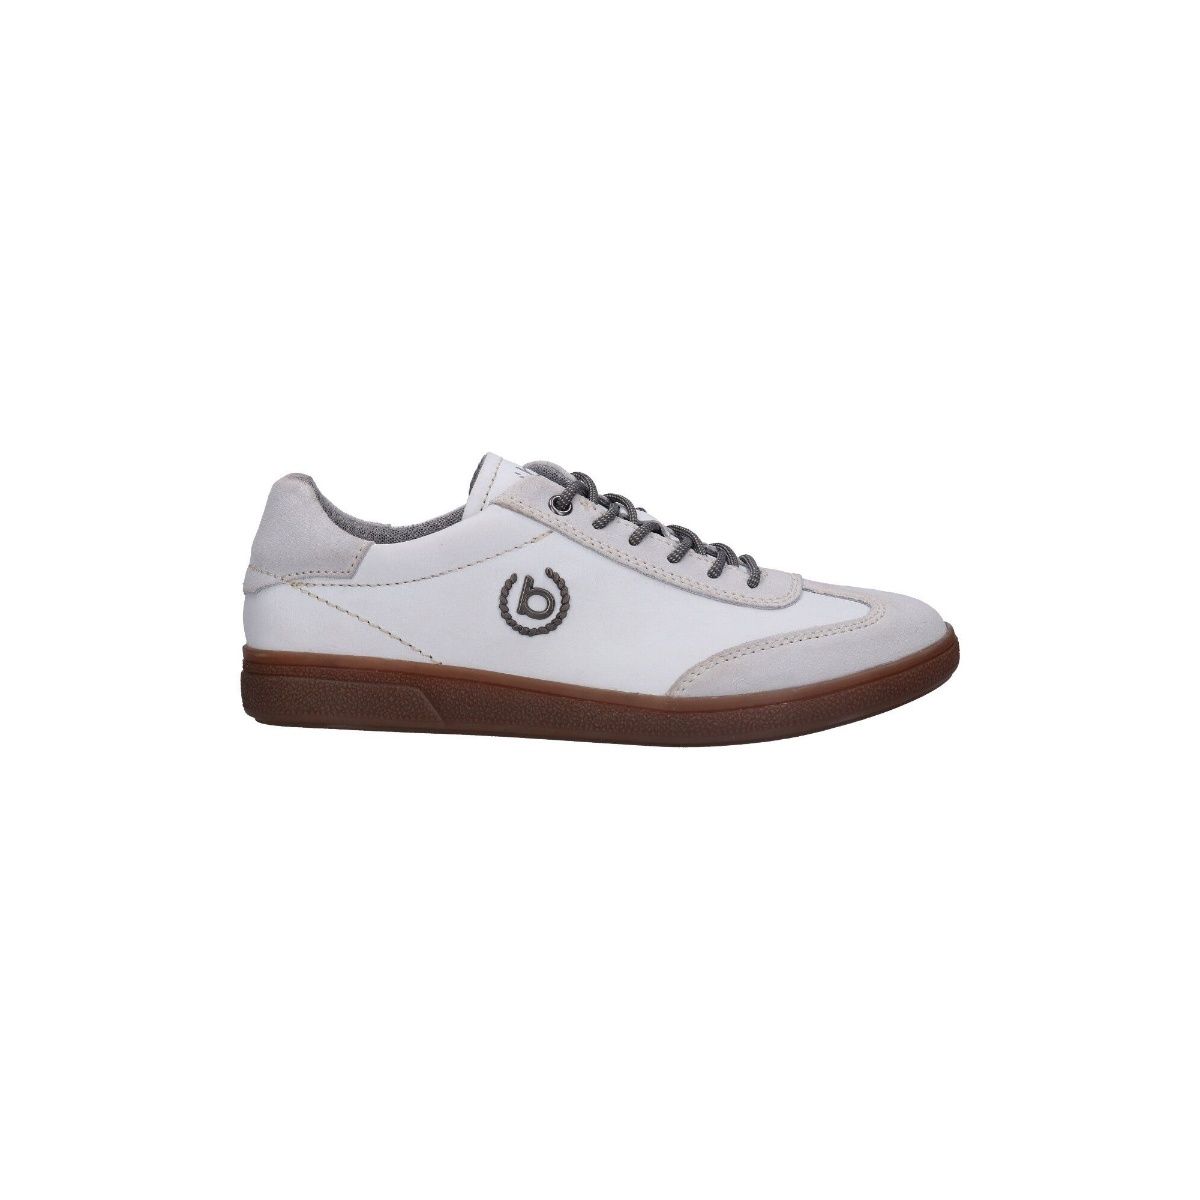 Bugatti Women Grey Textured Leather Sneakers Price in India, Full  Specifications & Offers | DTashion.com